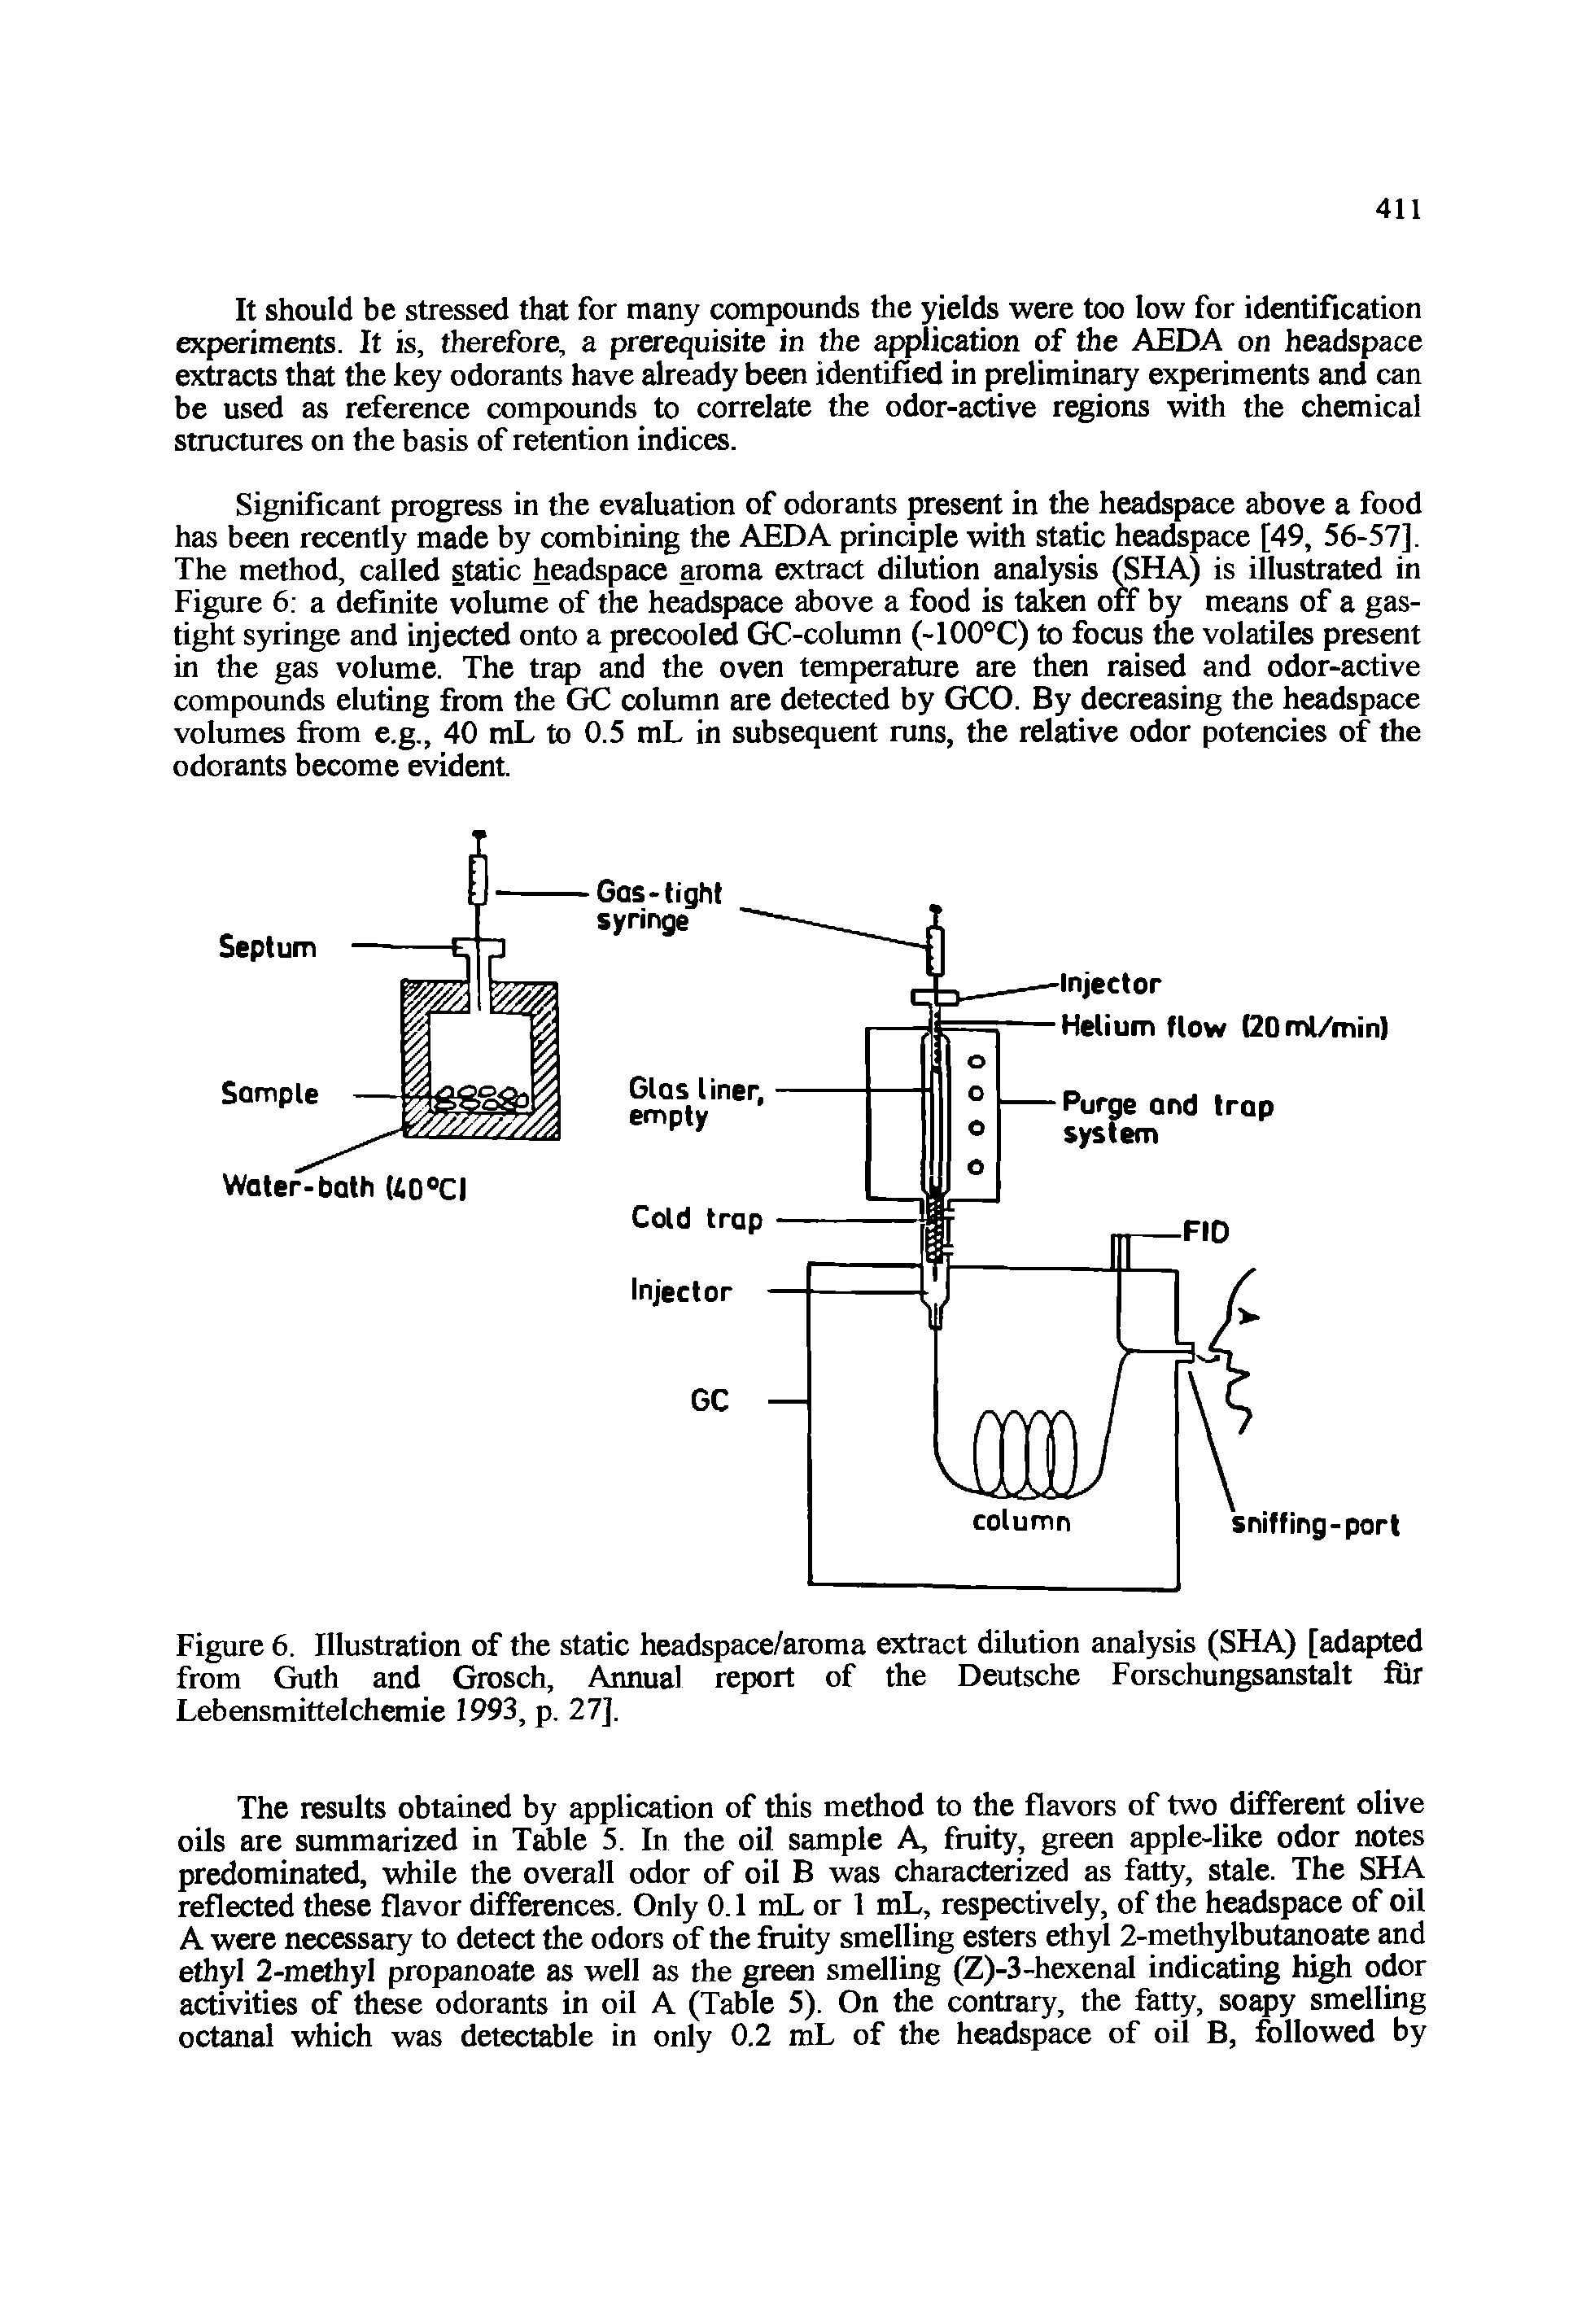 Figure 6. Illustration of the static headspace/aroma extract dilution analysis (SHA) [adapted from Guth and Grosch, Annual report of the Deutsche Forschungsanstalt fur Lebensmittelchemie 1993, p. 27],...